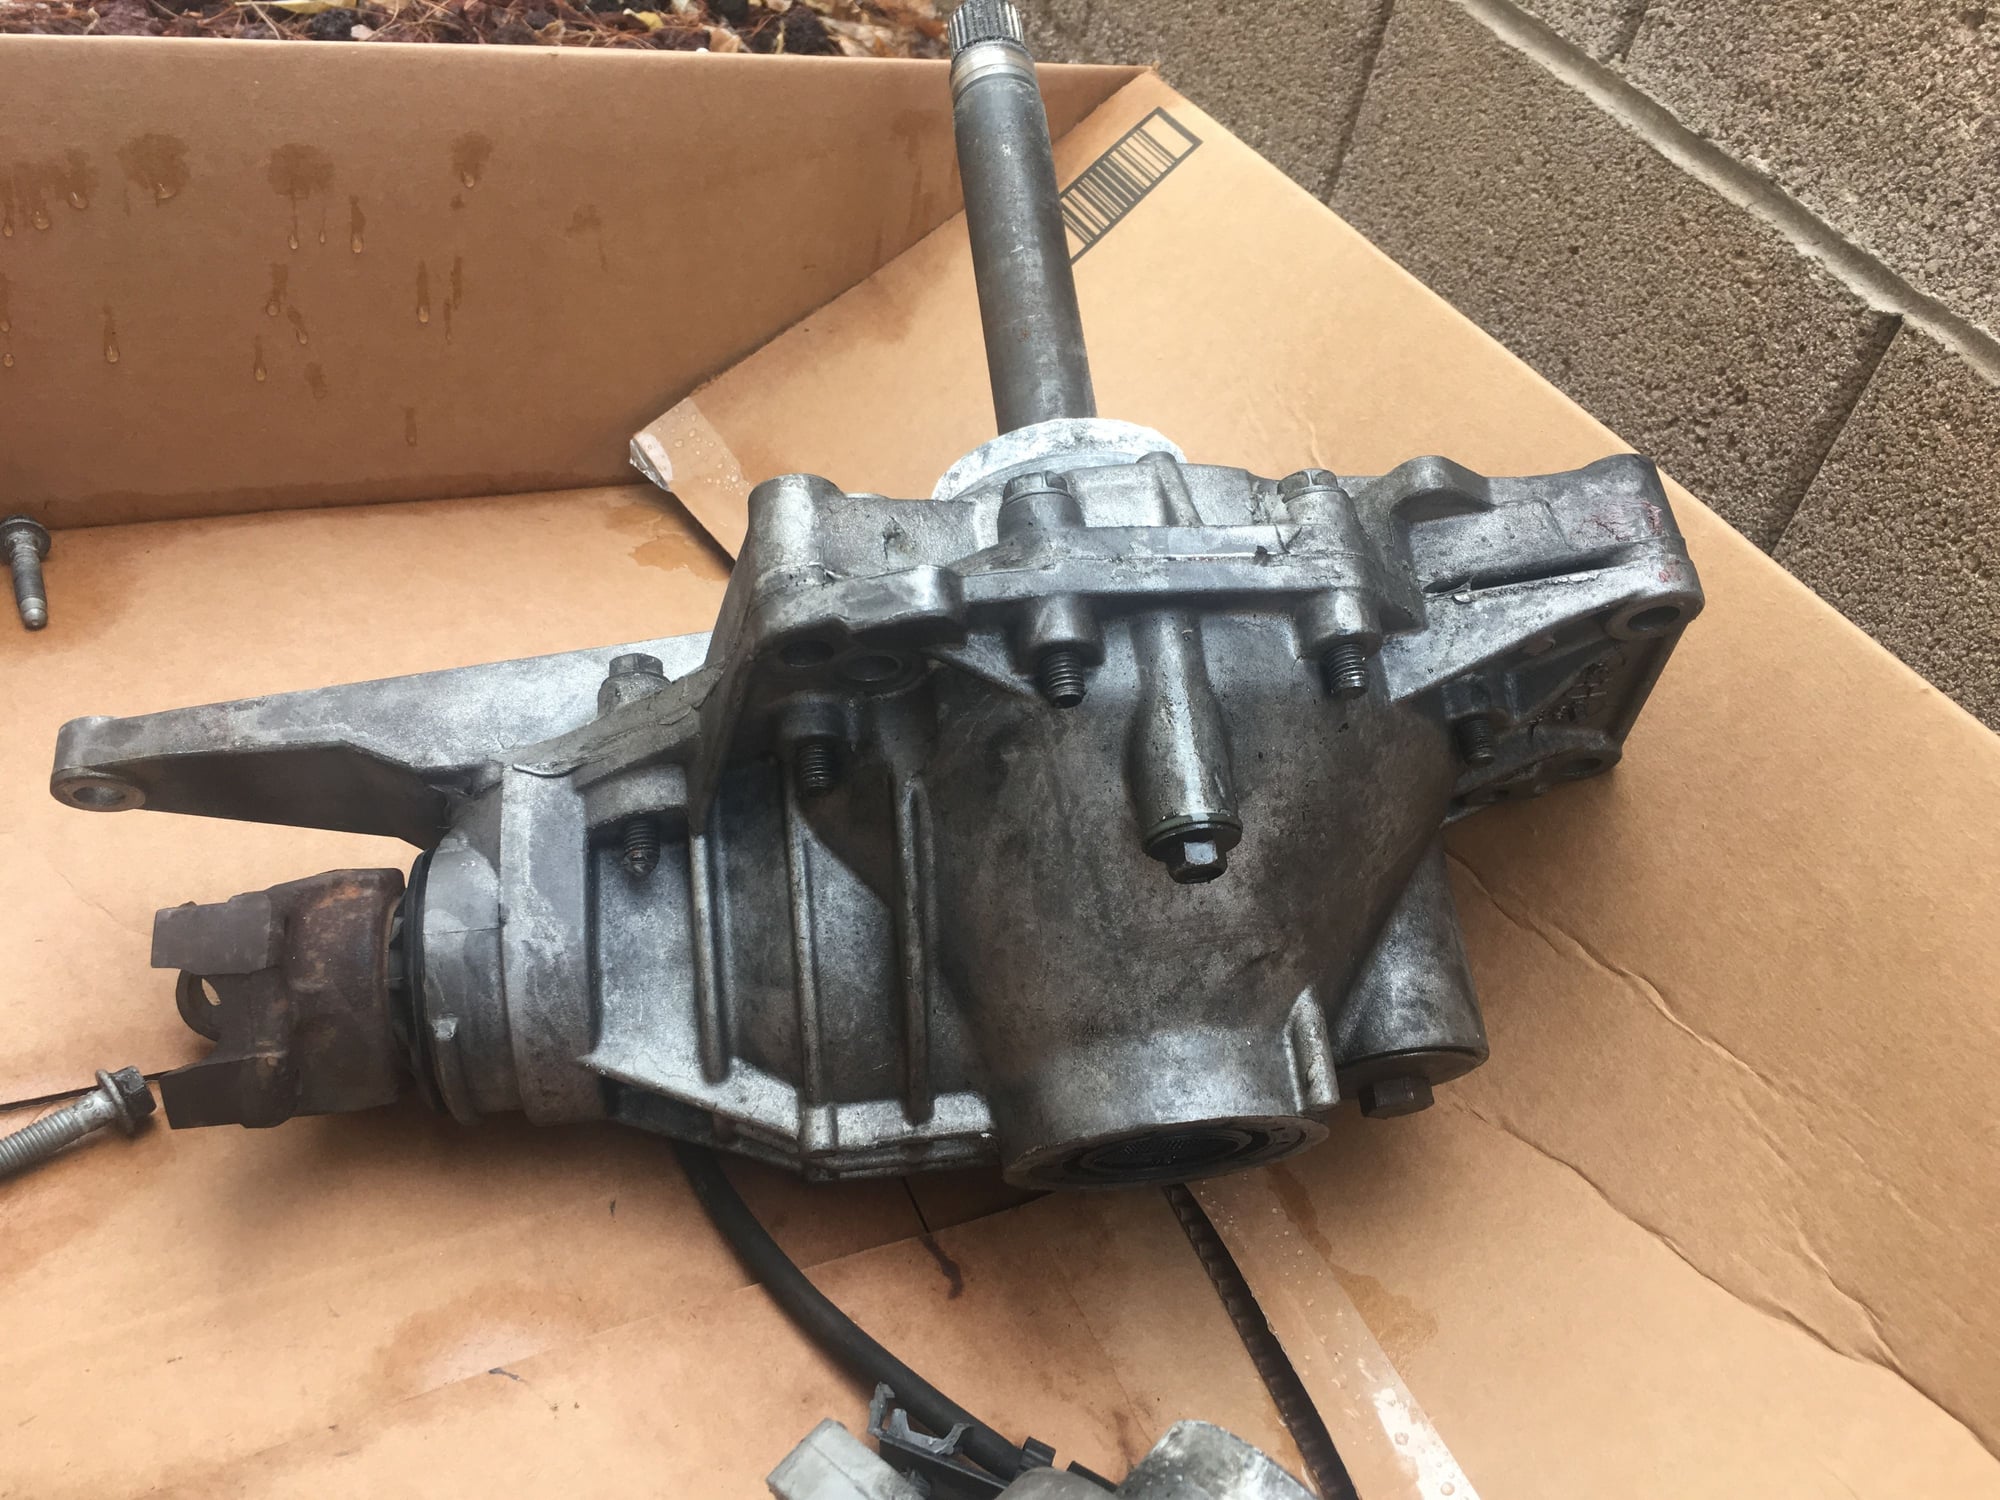  - TBSS front differential and oil pan - Henderson, NV 89074, United States